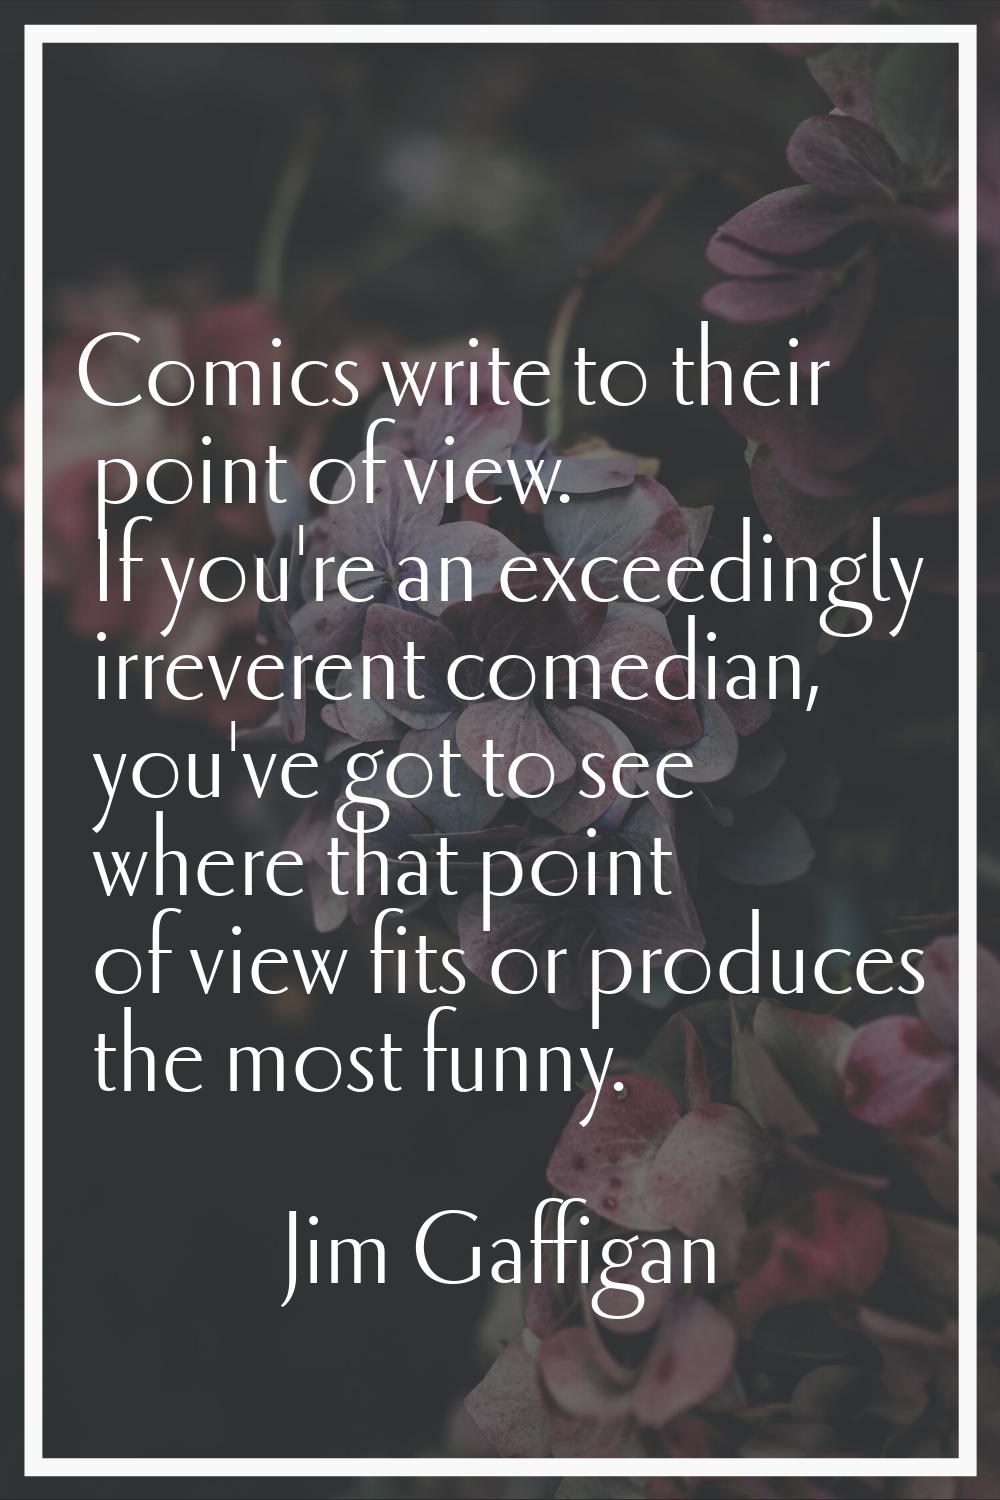 Comics write to their point of view. If you're an exceedingly irreverent comedian, you've got to se